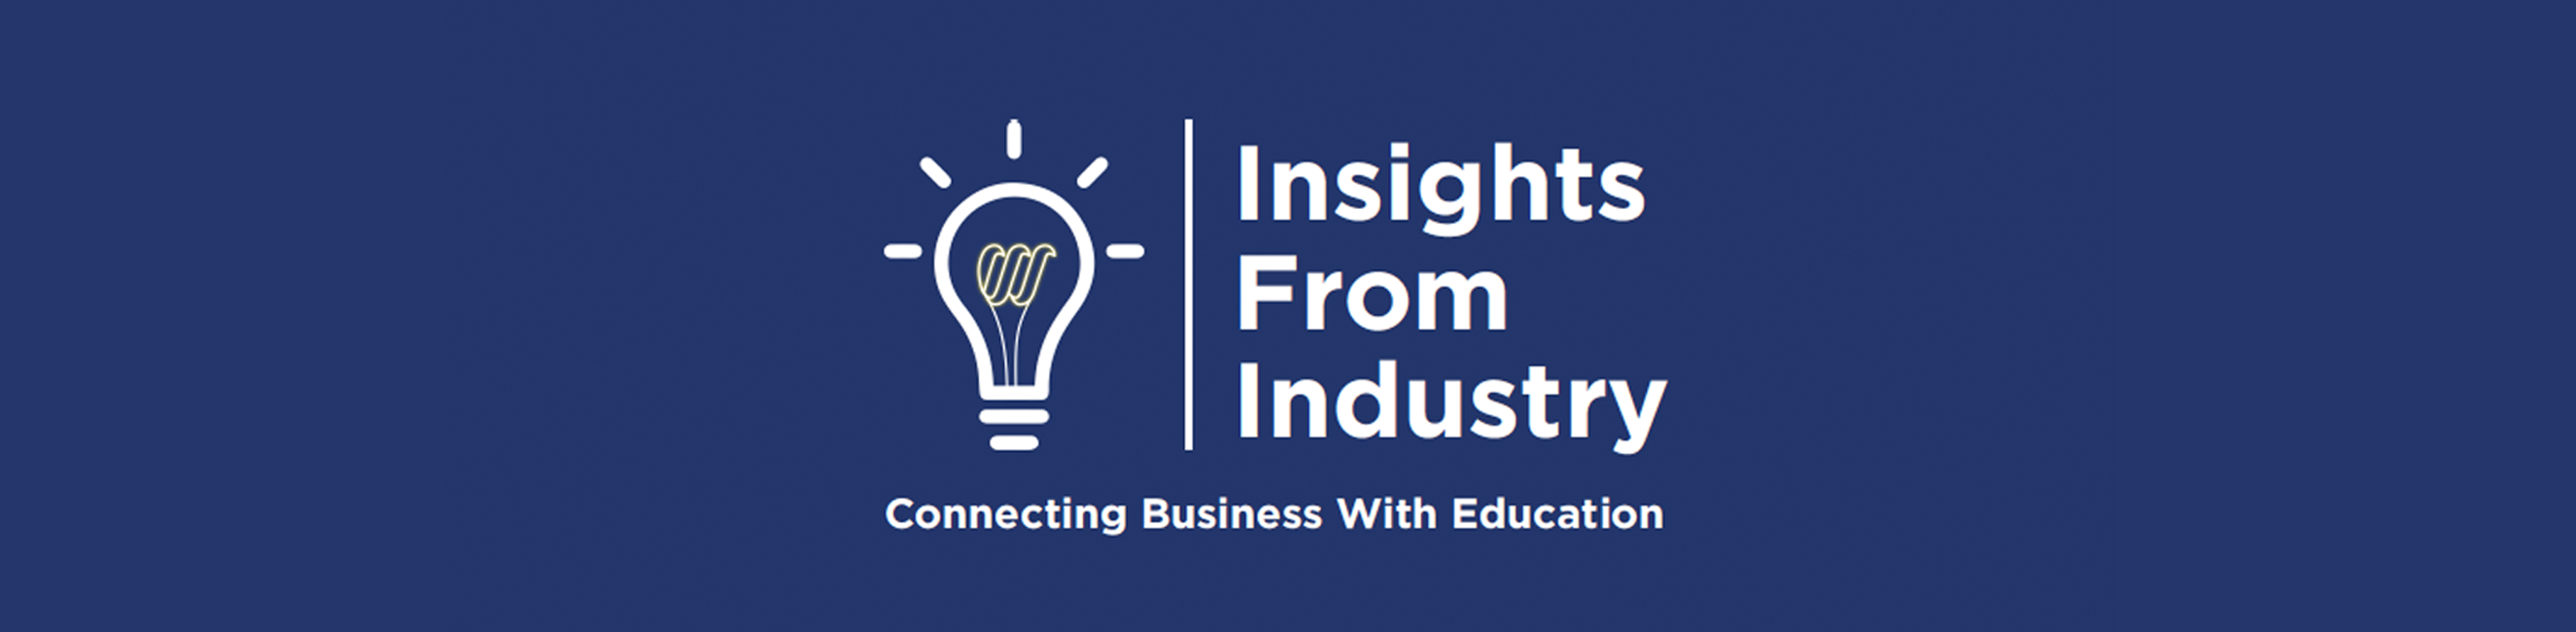 Insights from Industry